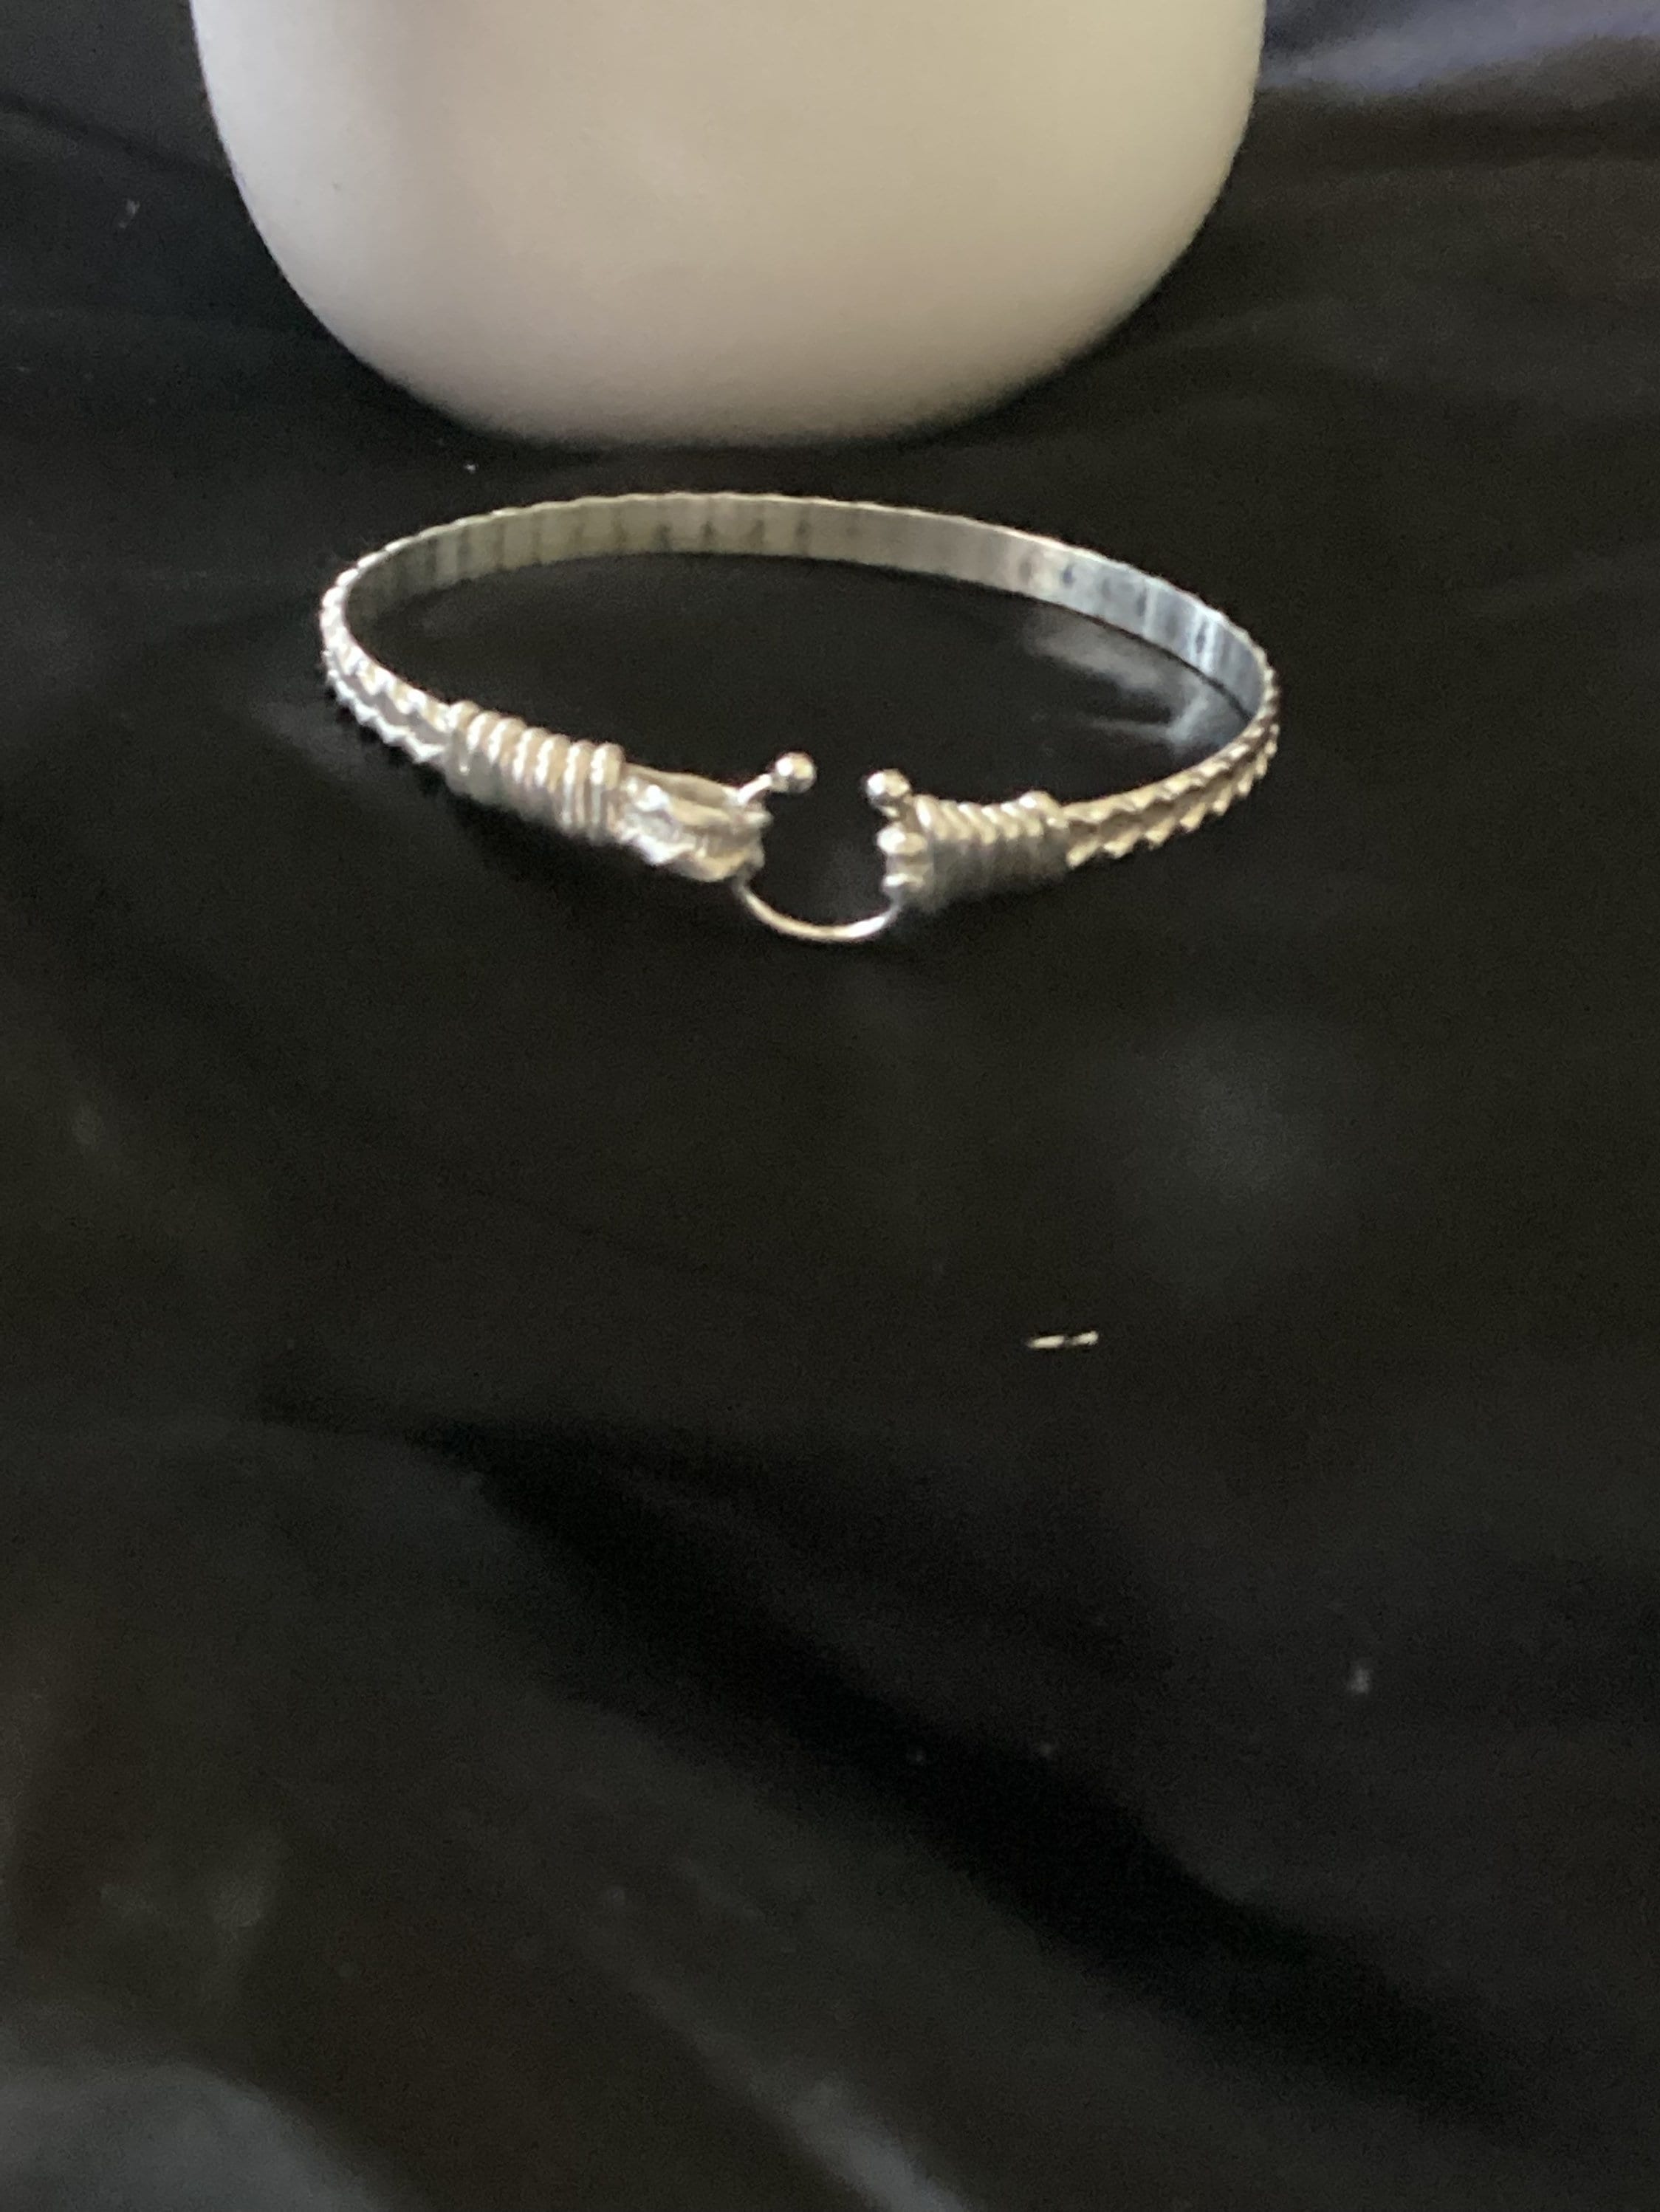 Silver Pattern Hook 925 Sterling Silver Wire Wrapped Bangle Bracelet. It Is Handmade in All 925 Sterling Silver material.